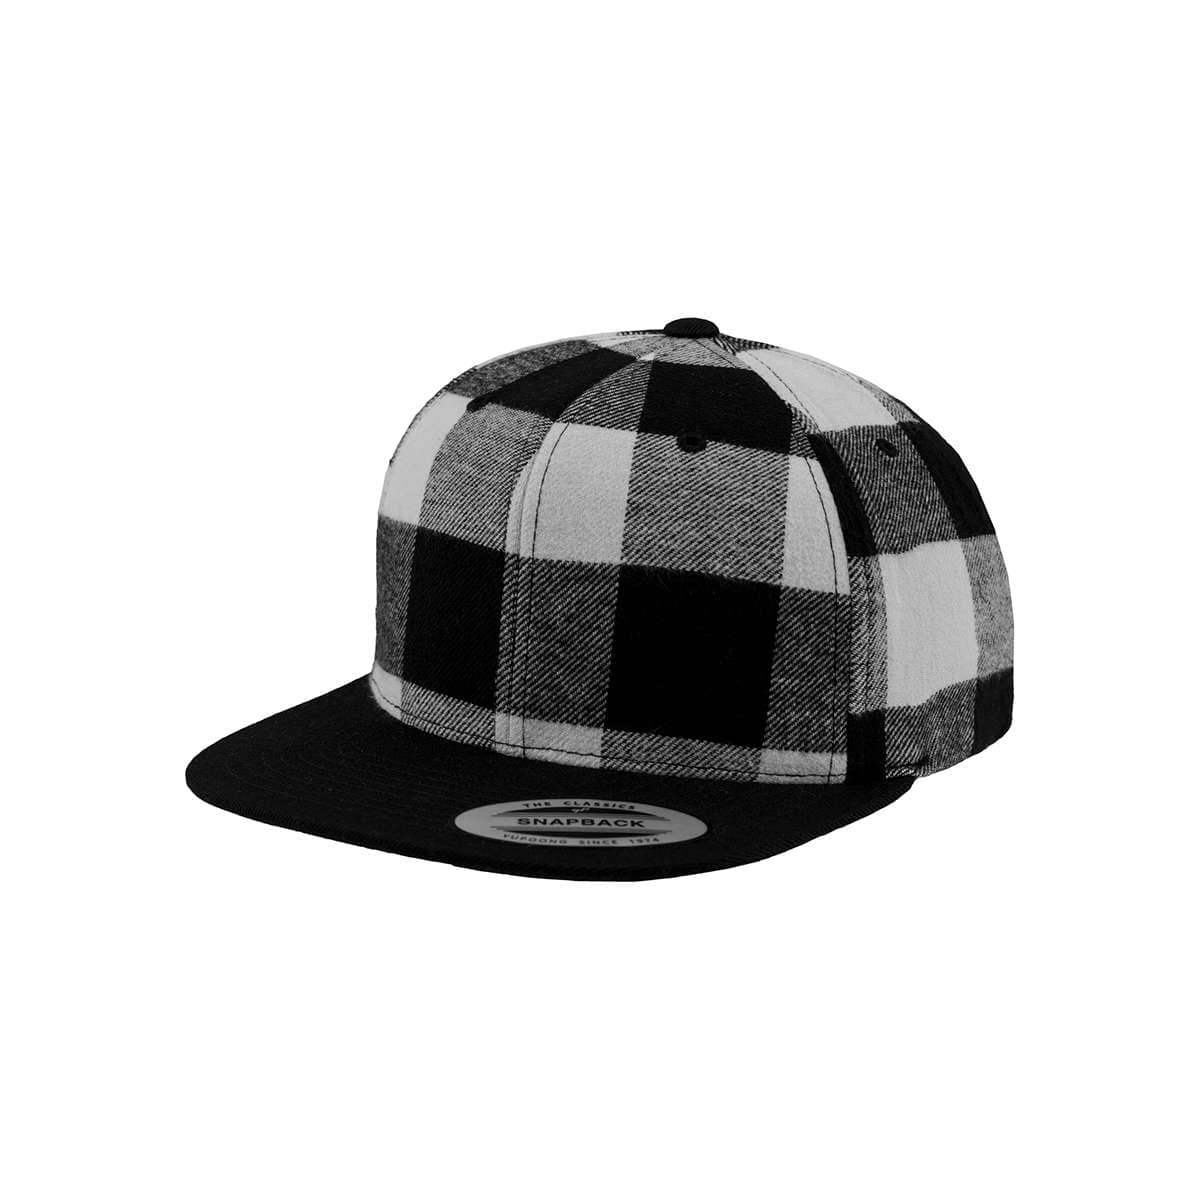 CHECKED FLANELL SNAPBACK 6089RC BLACK / WHITE